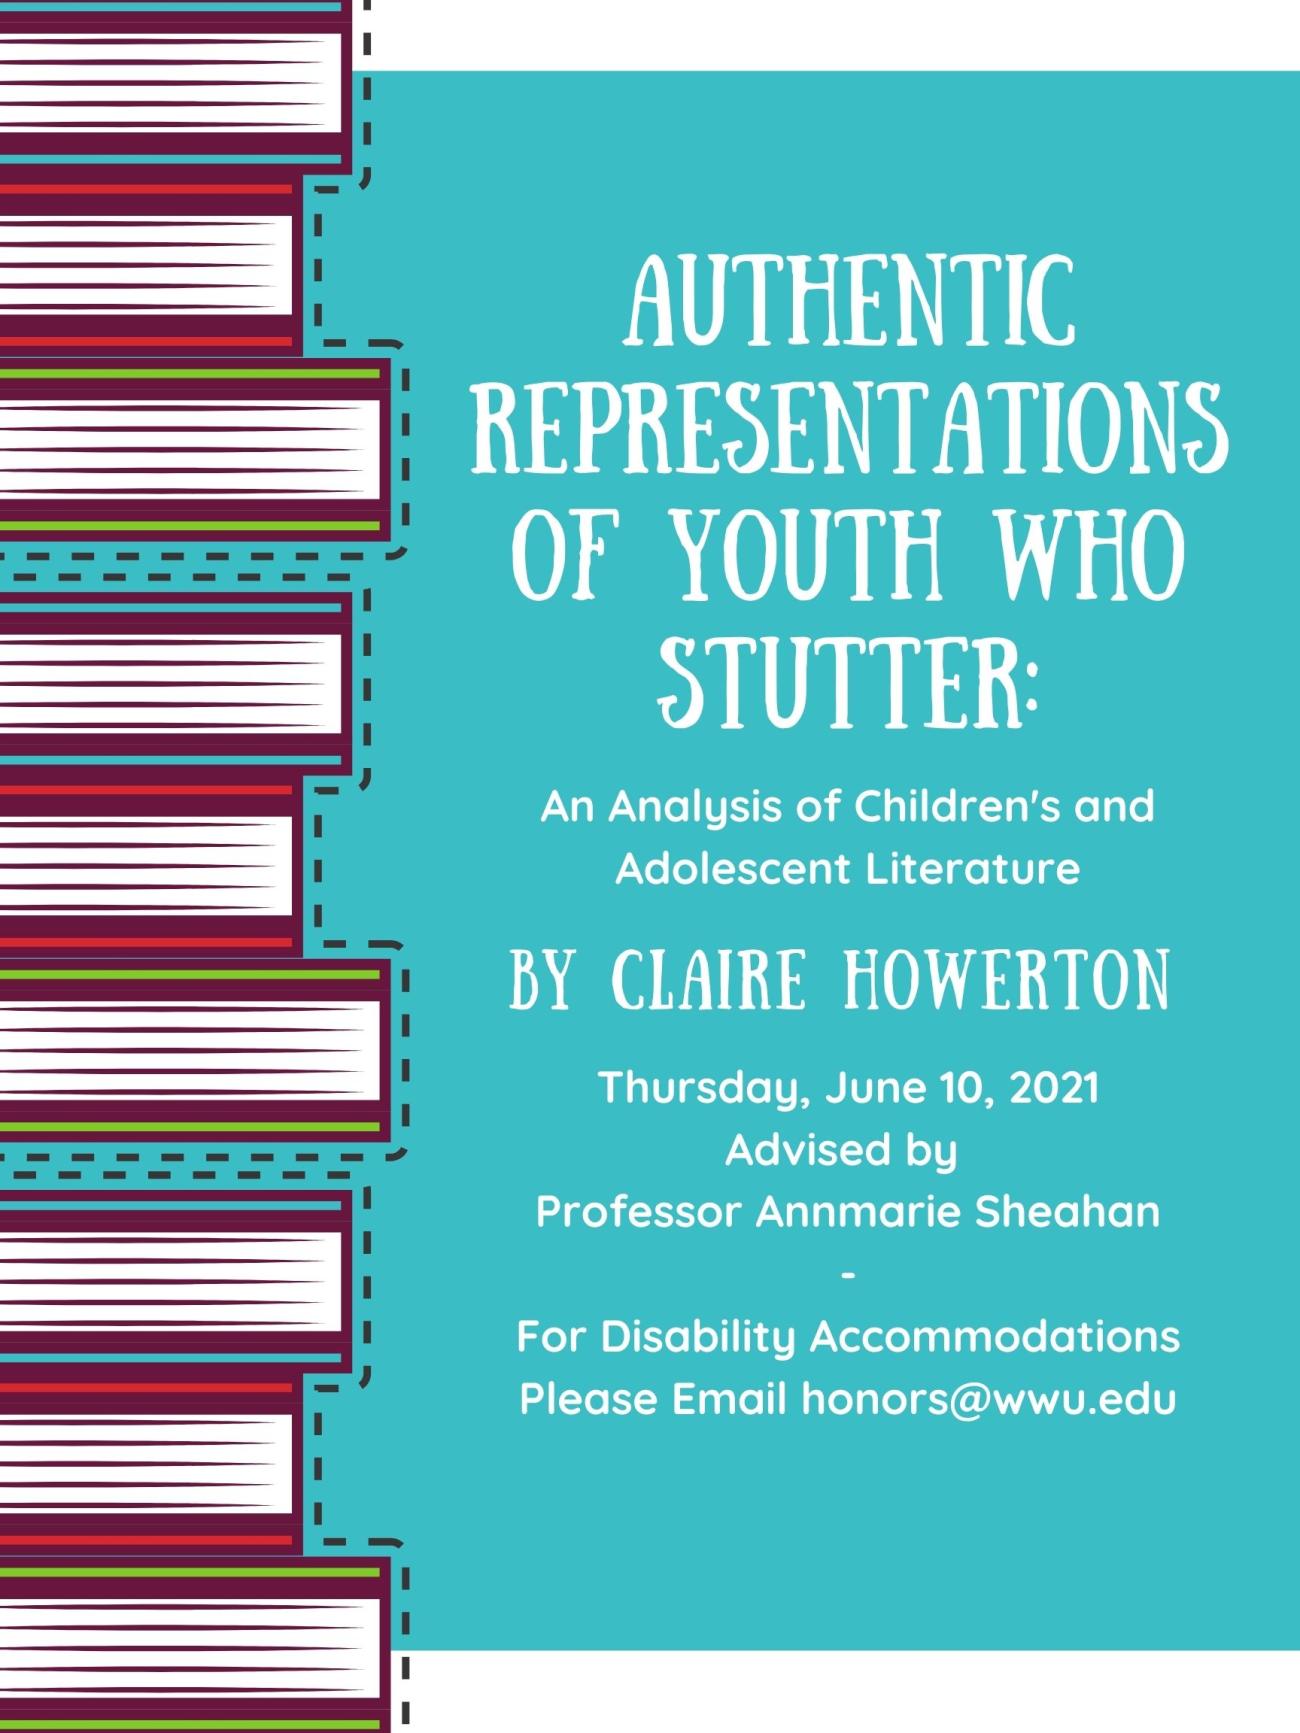 A stack of books on the left sits on a bright blue background. text reads "authentic representations of youth who stutter: an analysis of children's and adolescent literature. by claire howerton thursday june 10 2021 advised by professor annmarie sheahan - for disability accommodations please email honors@wwu.edu